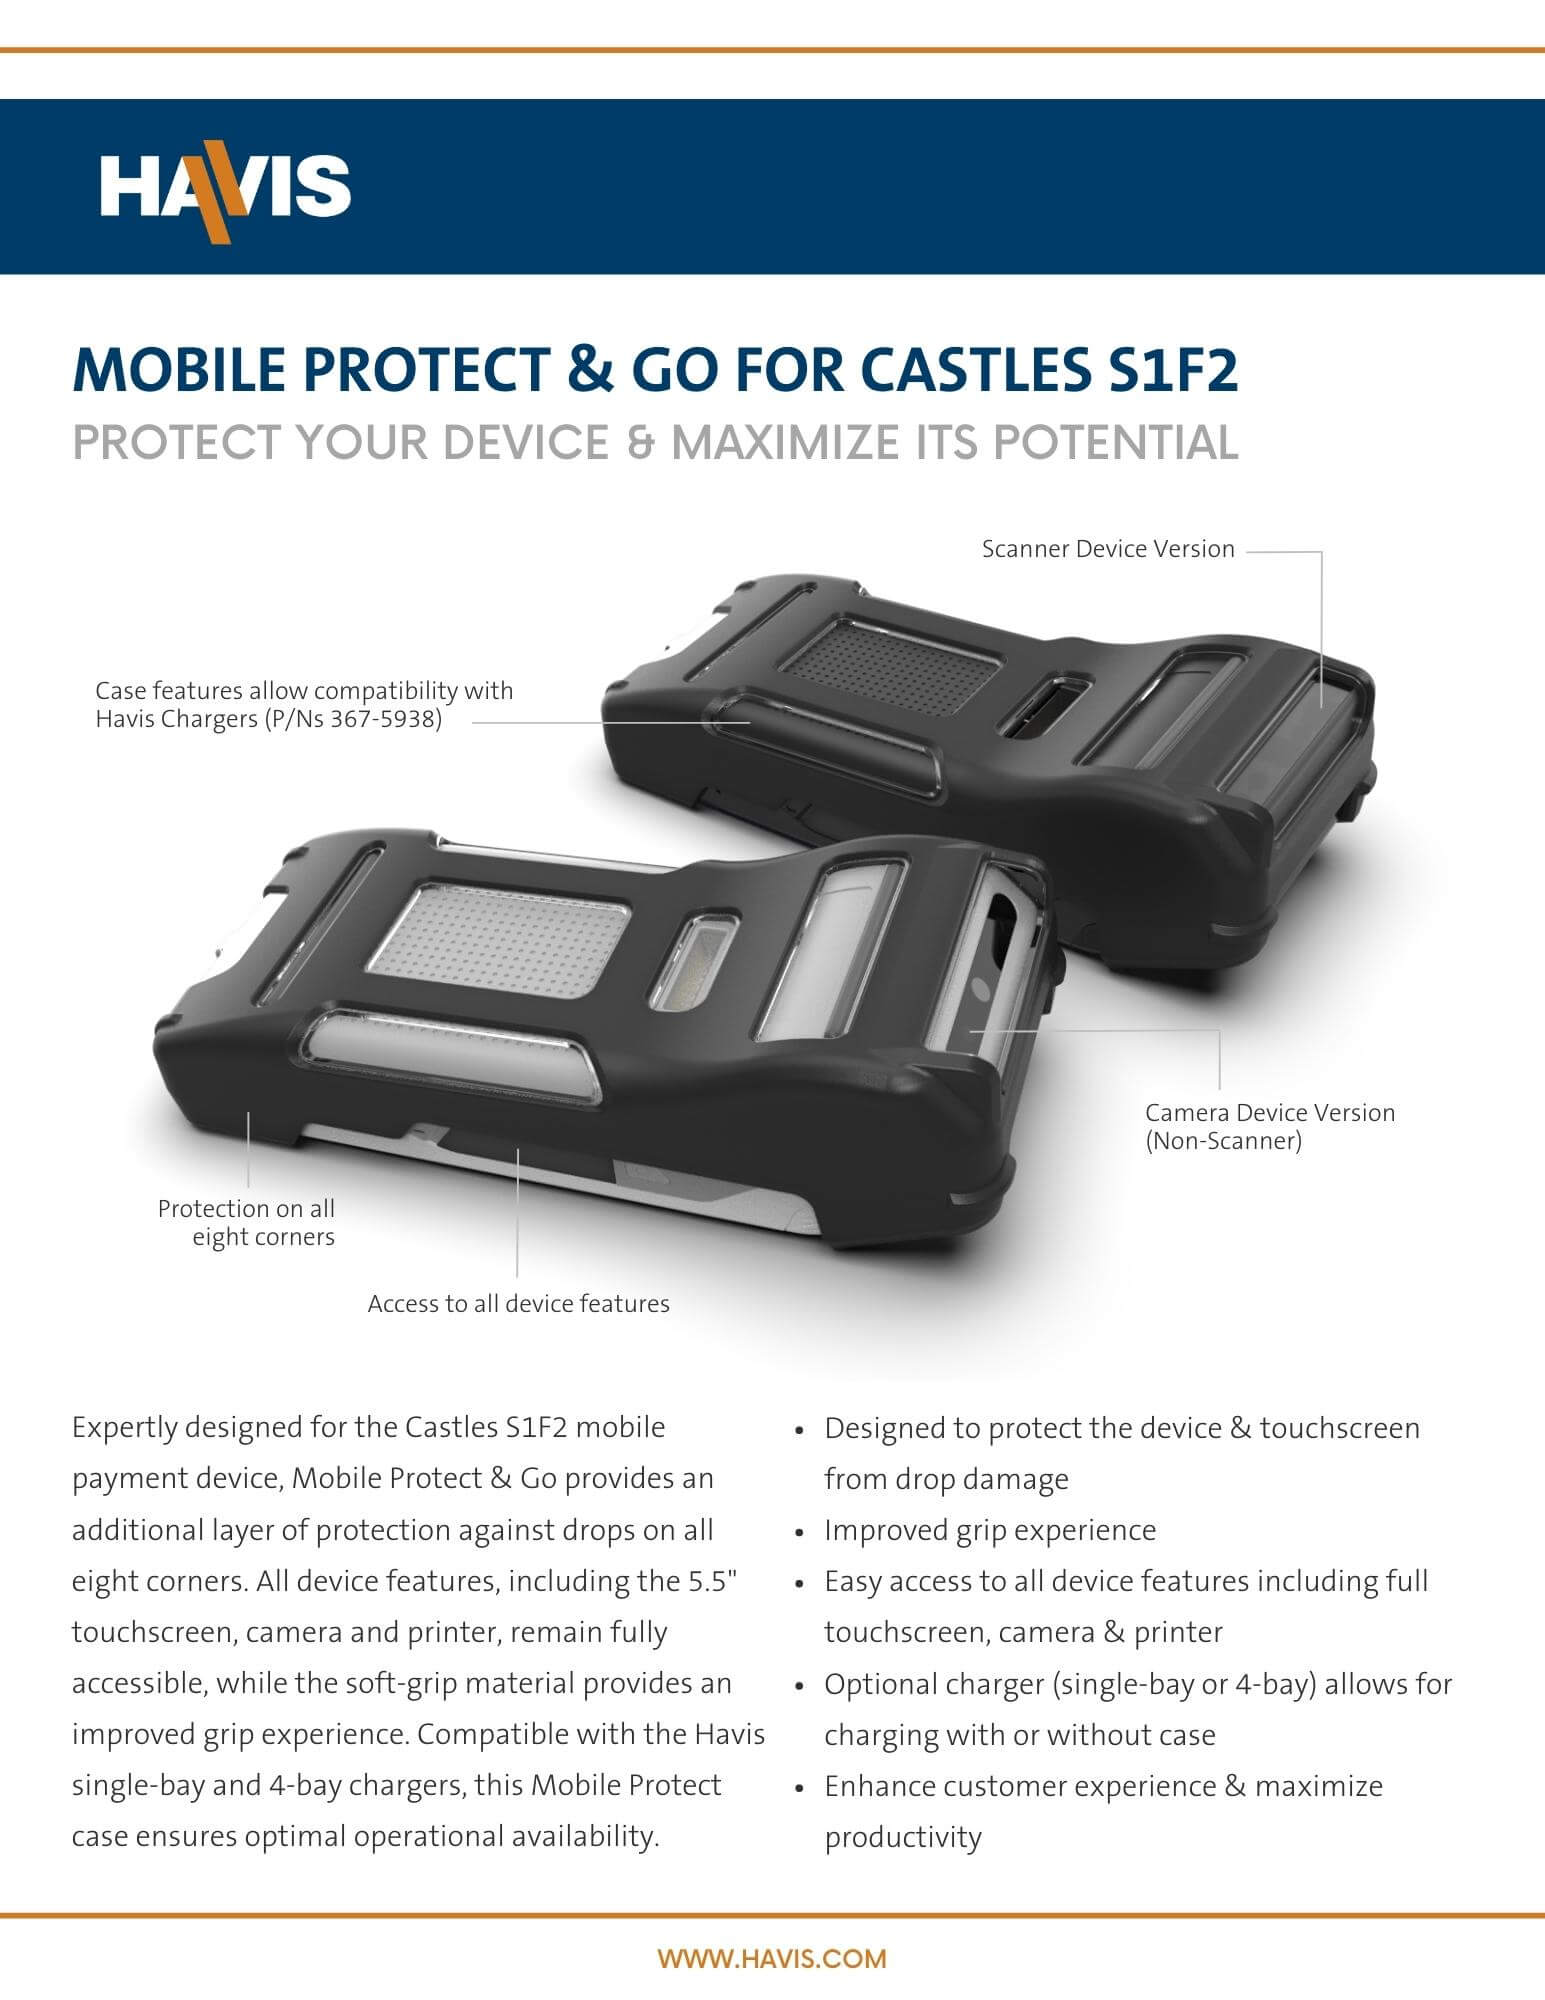 Mobile Protect & Go for Castles S1F2